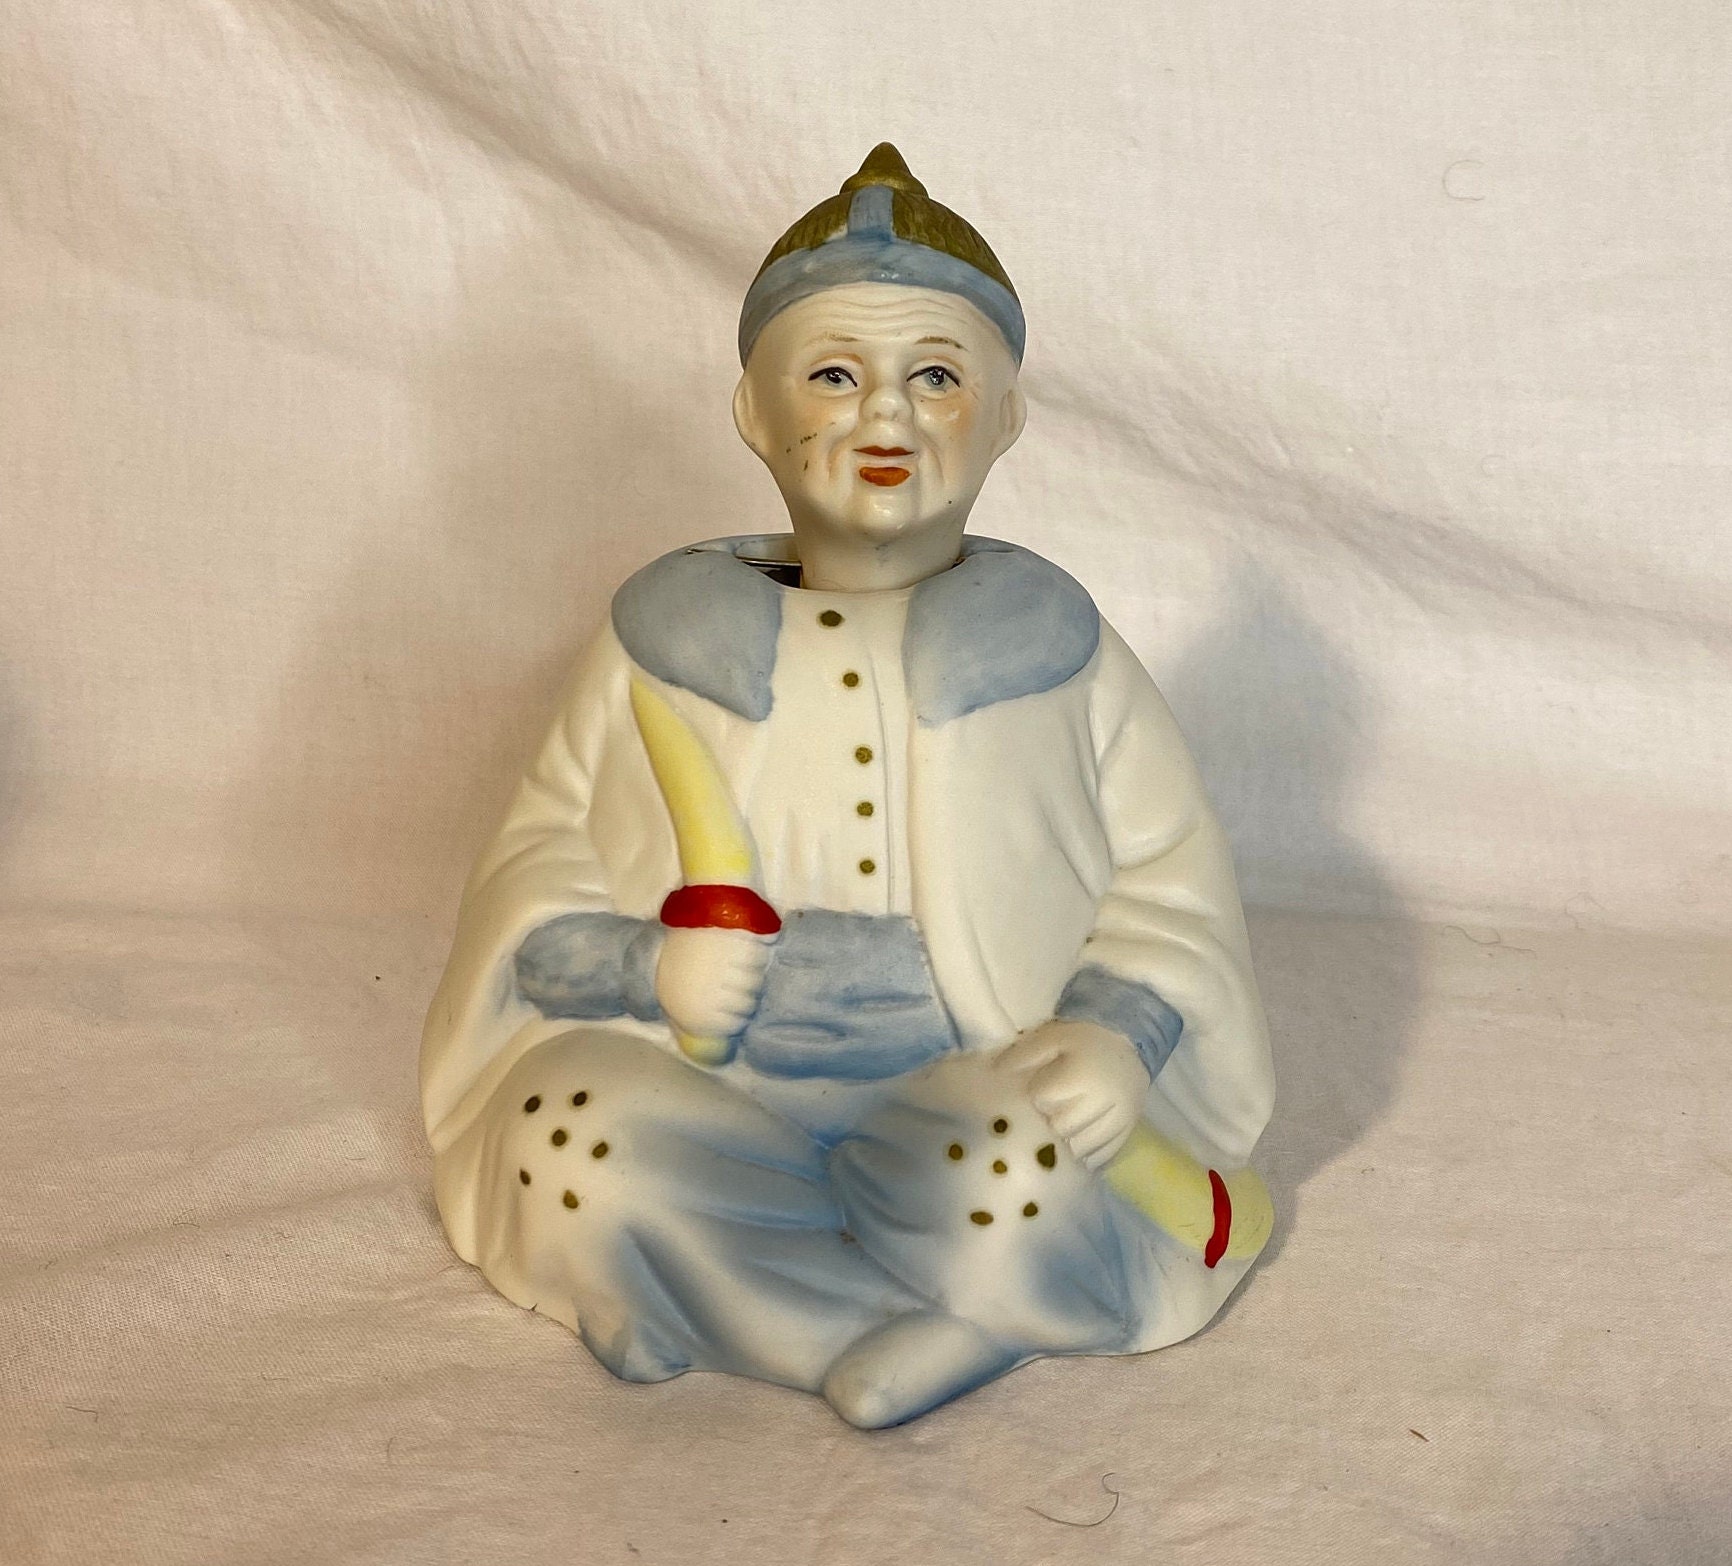 Sold at Auction: Clockwork advertising nodder figure of a man fishing